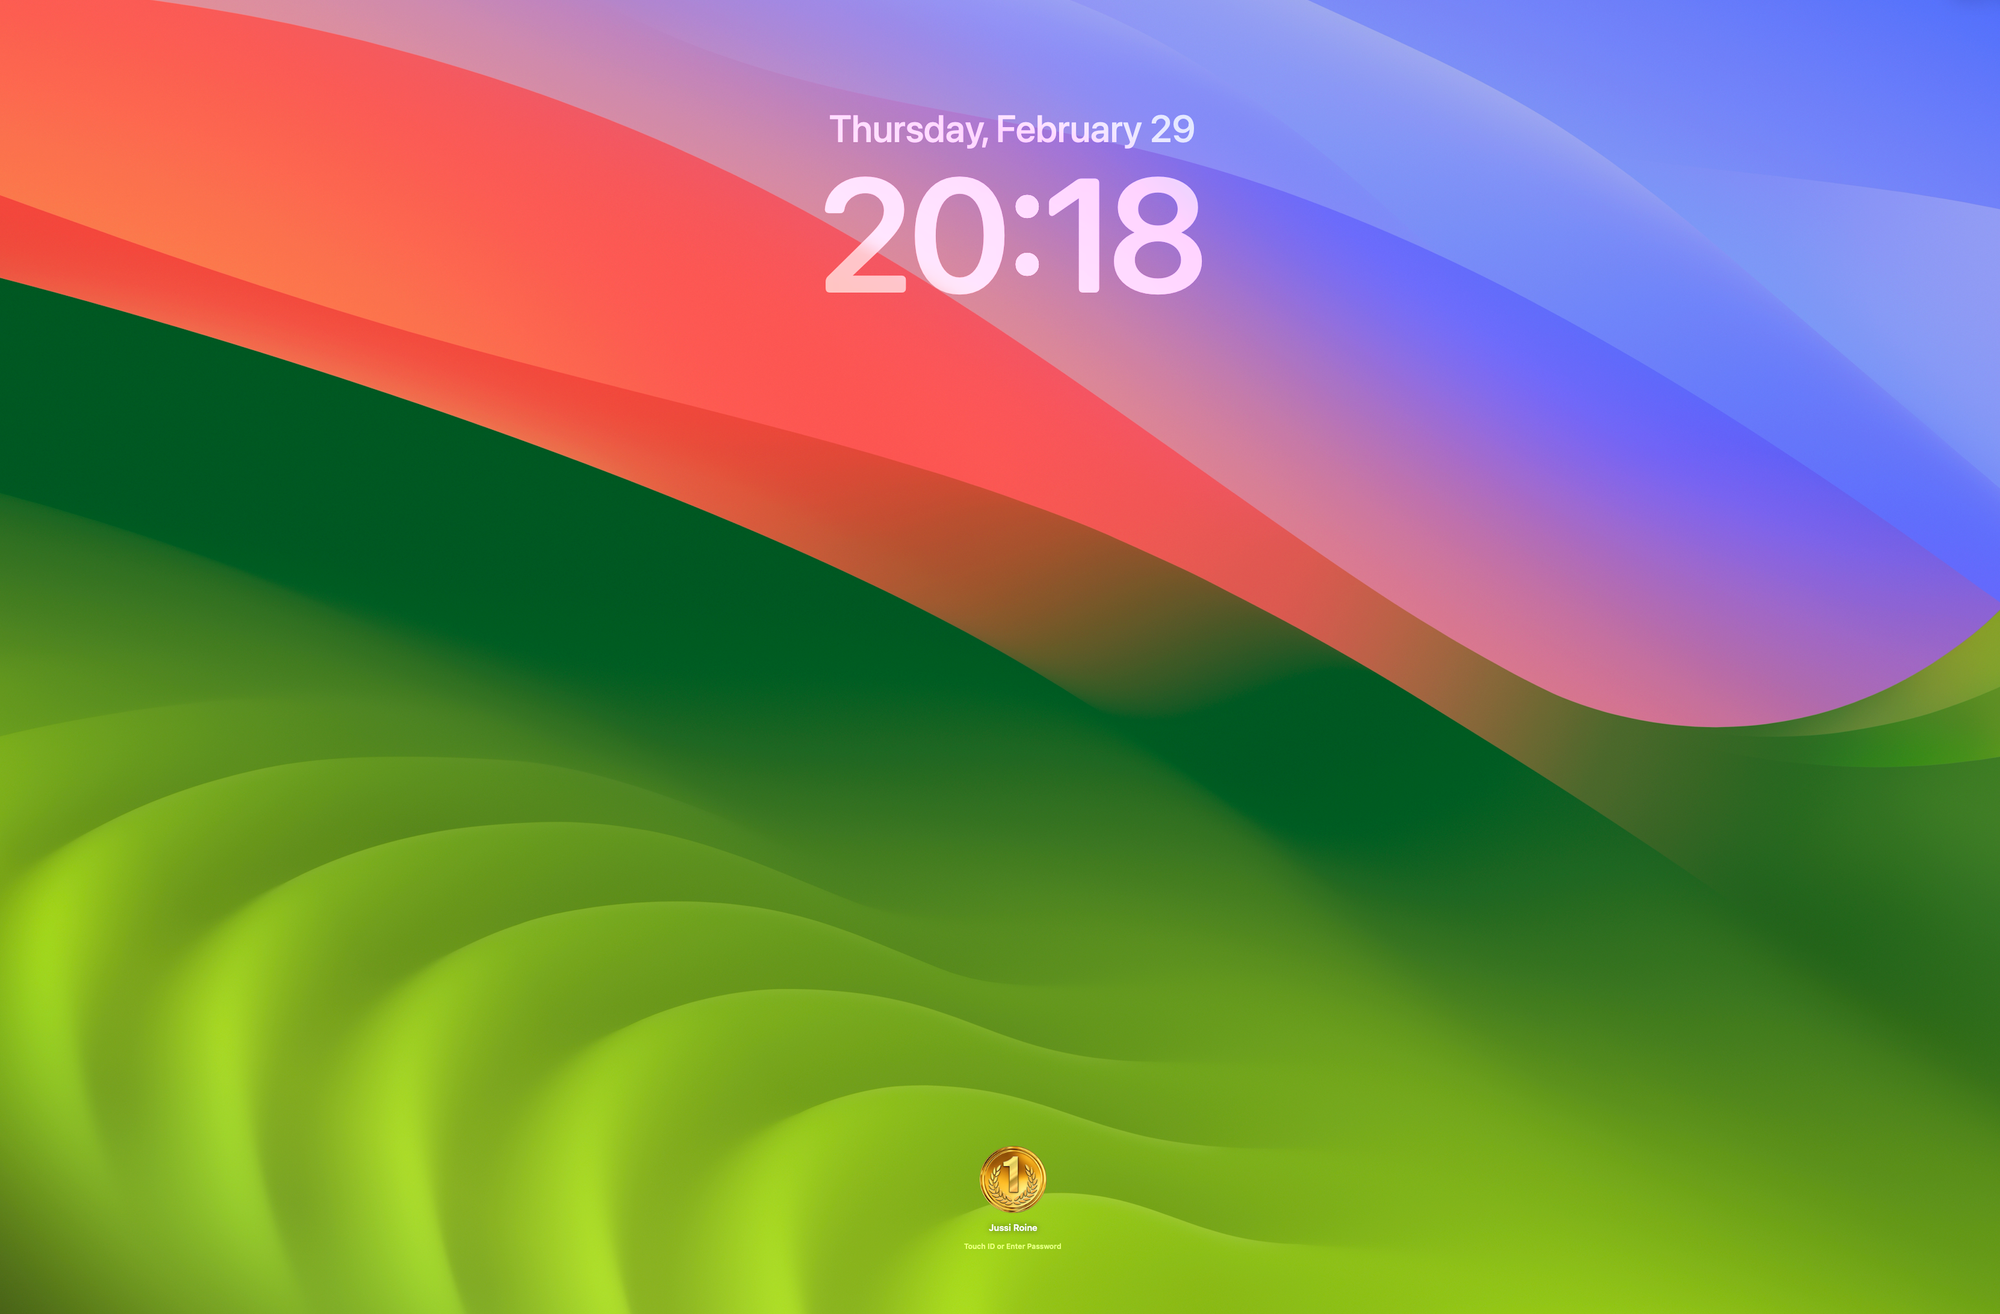 Fixing a missing profile picture in the MacOS Sonoma Lock Screen for the user